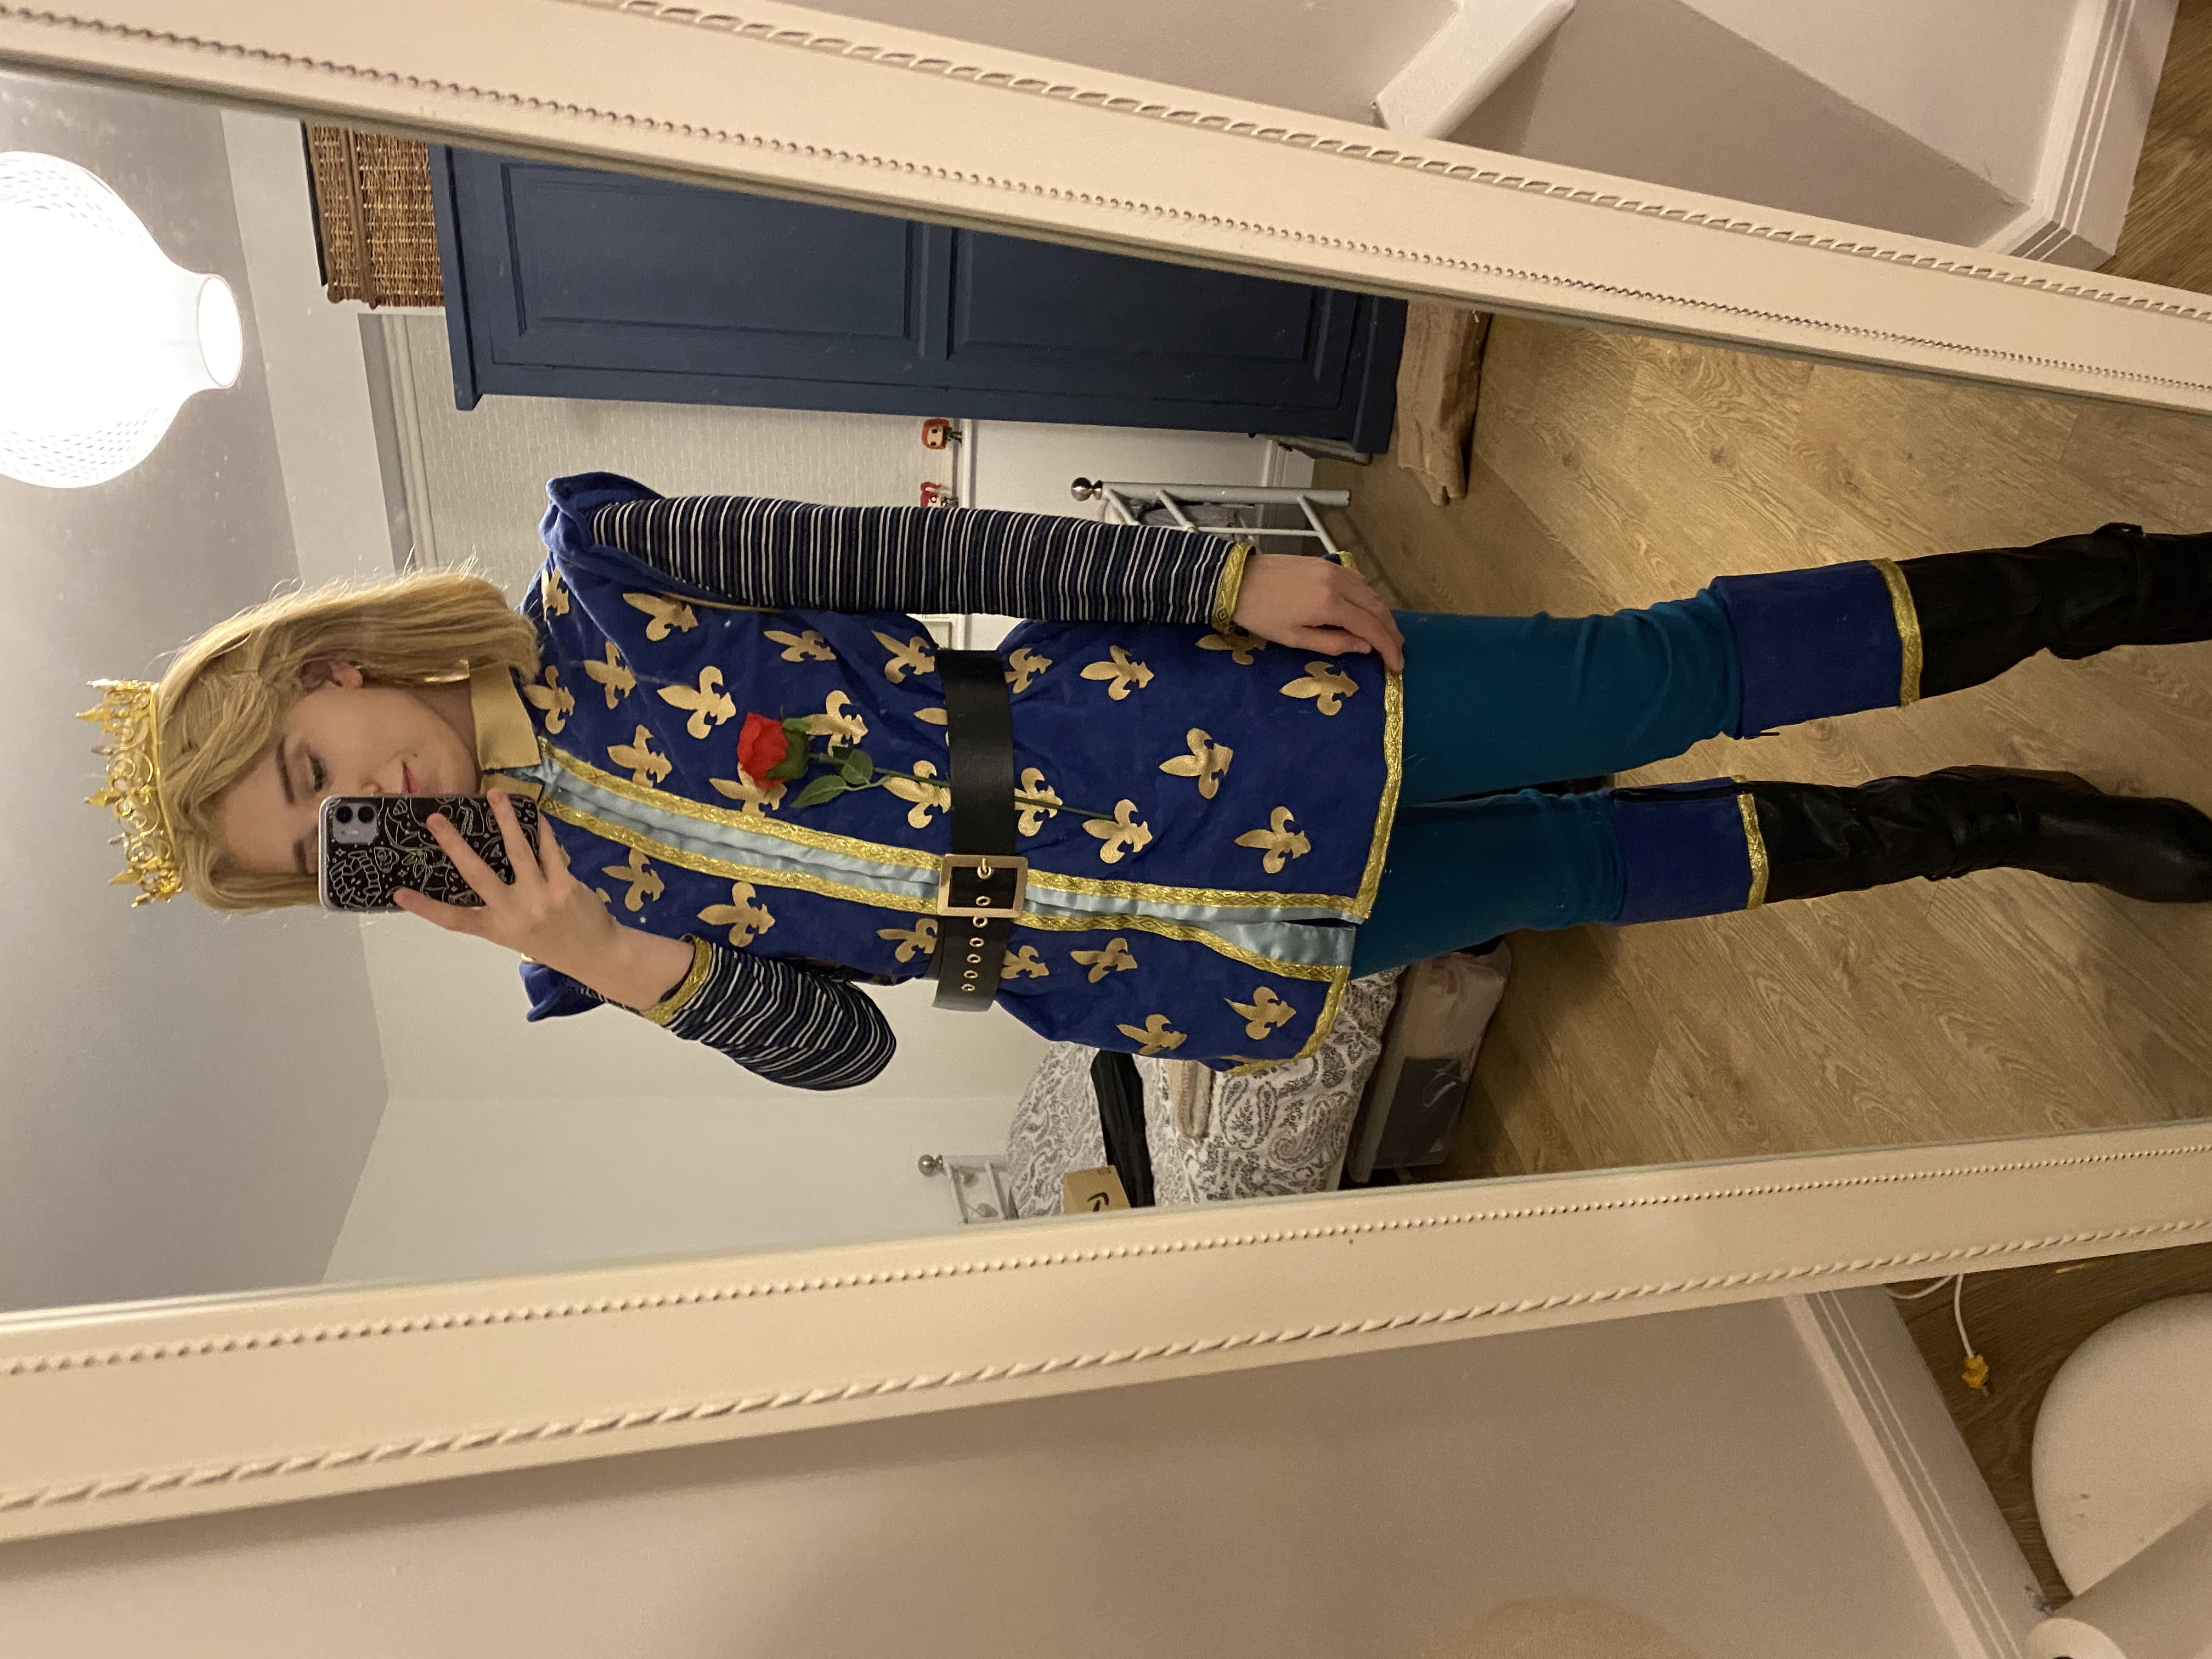 Full image of the blonde wig and gold crown, blue and gold bodice, blue leggings, black boots with a blue and gold trim and a black belt. A fake rose is tucked into the belt.